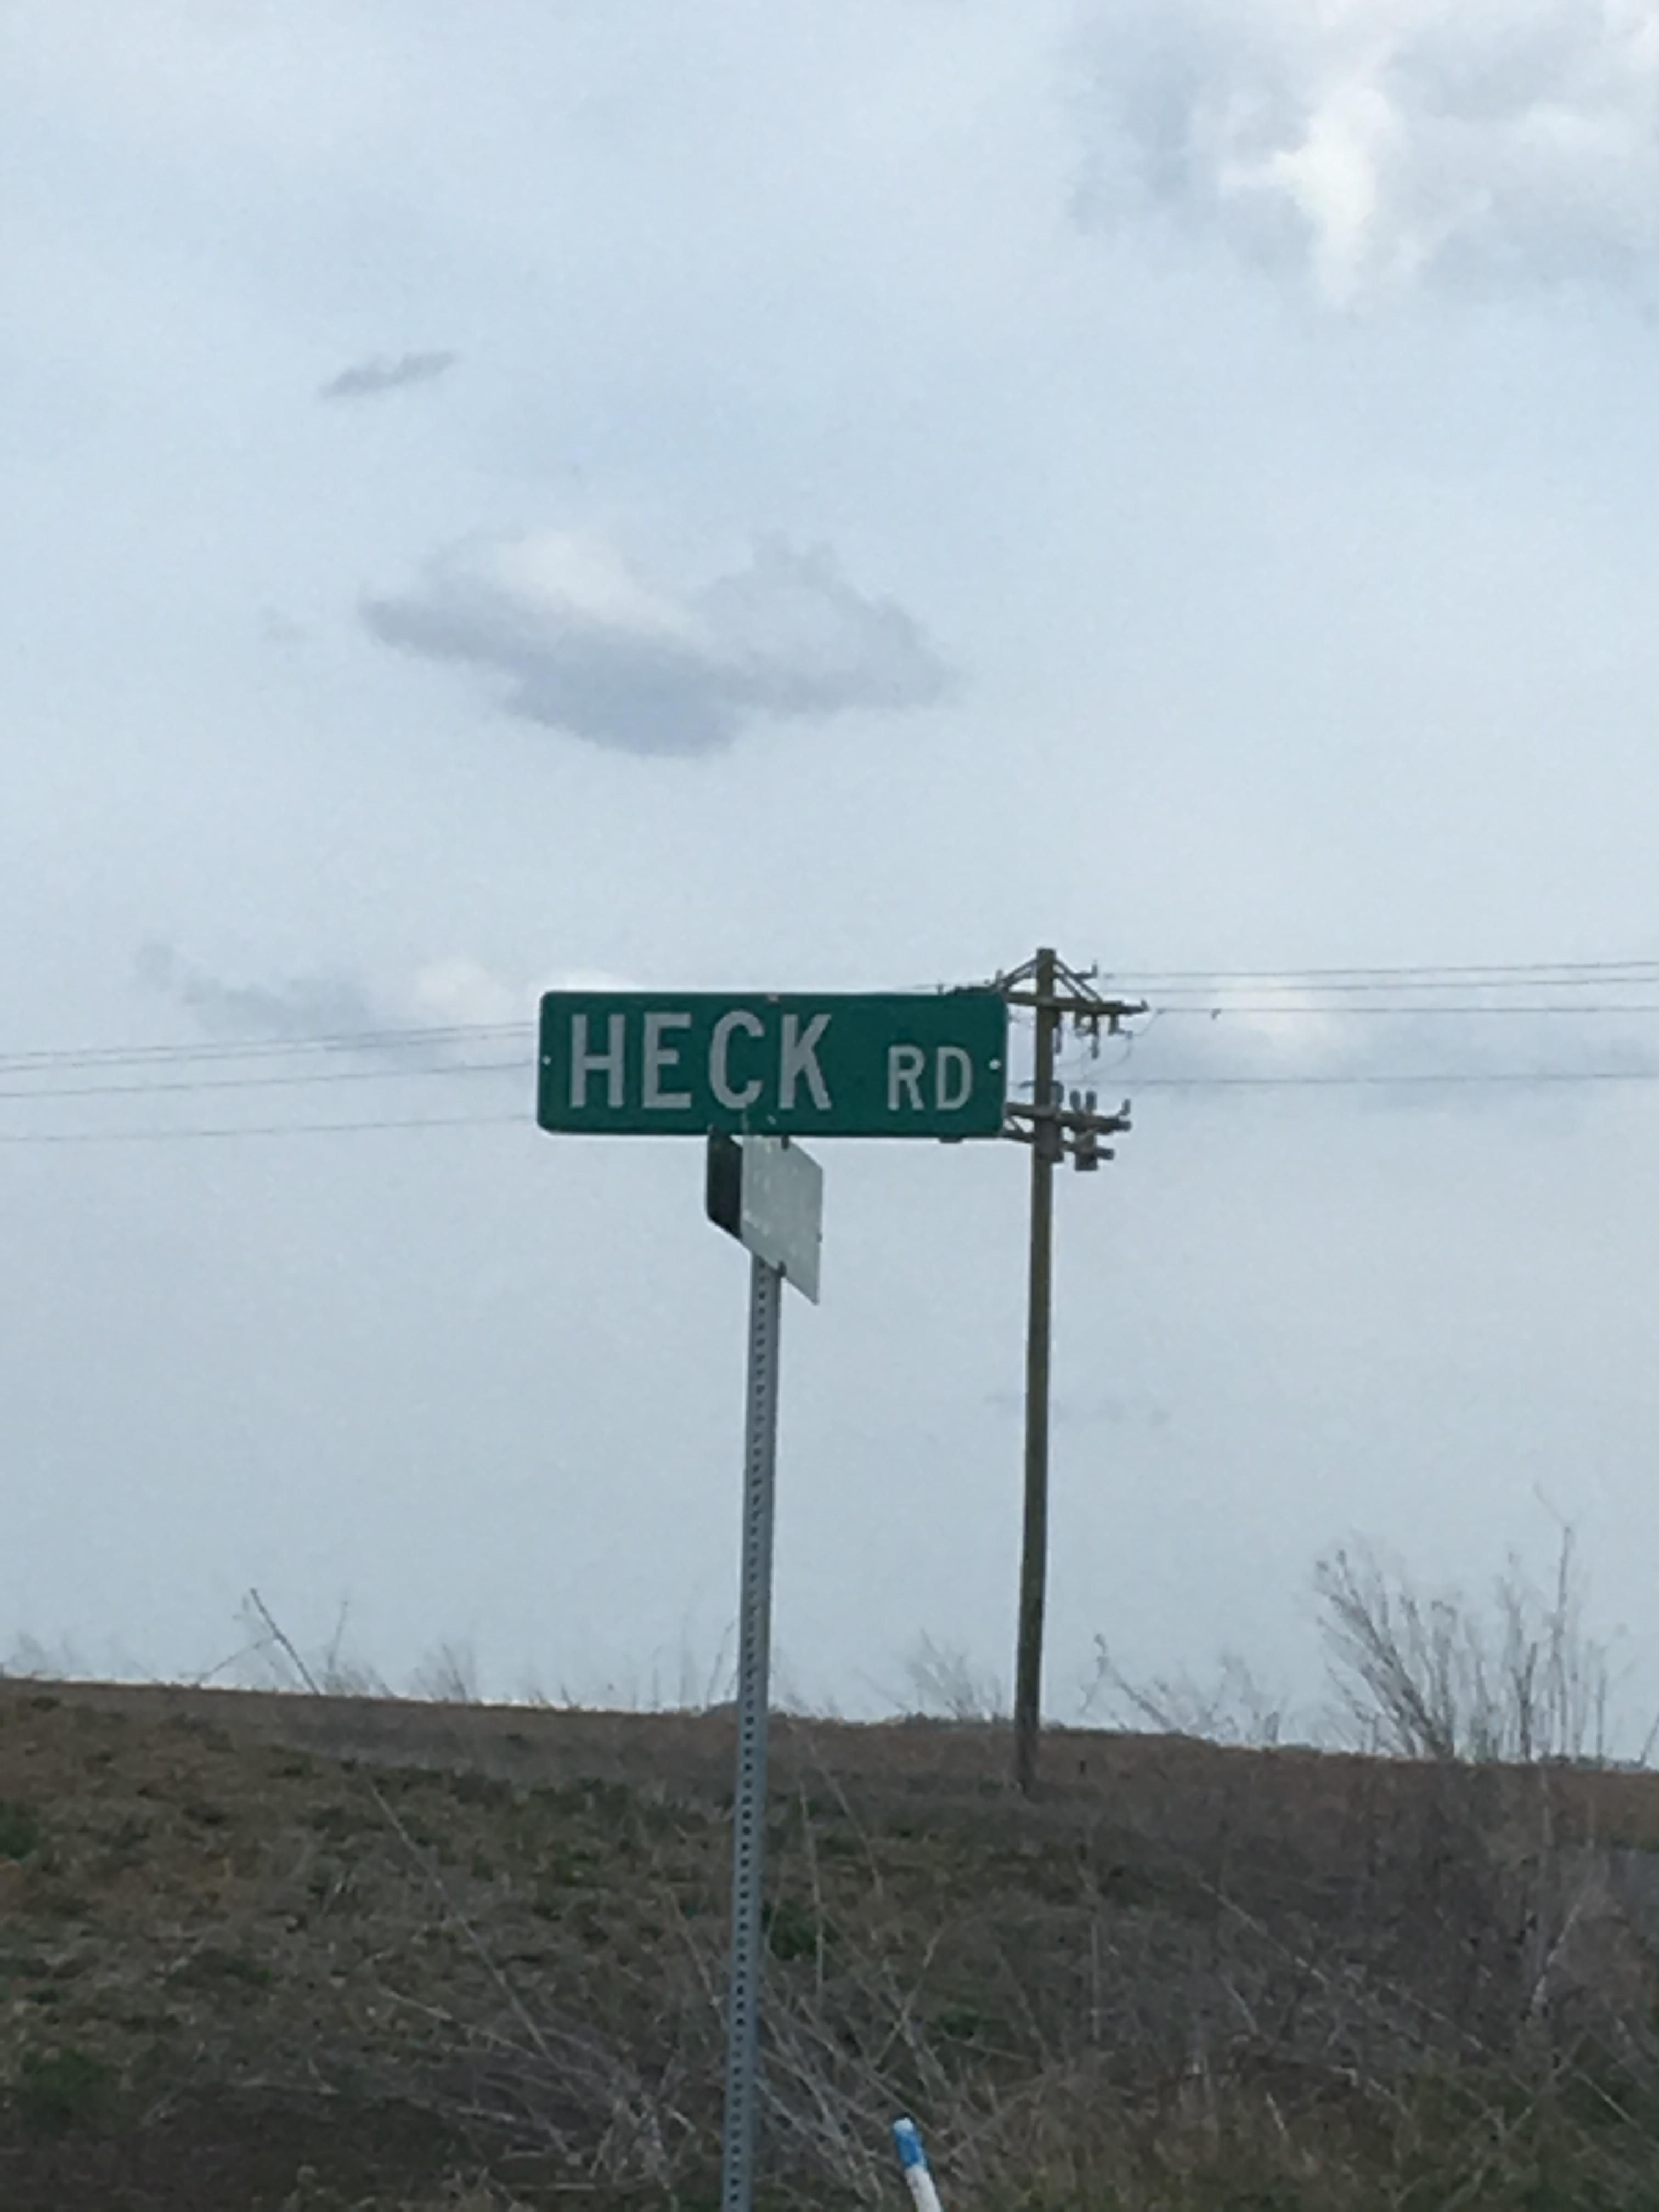 My town’s too small to connect with the highway to hell, but we make do